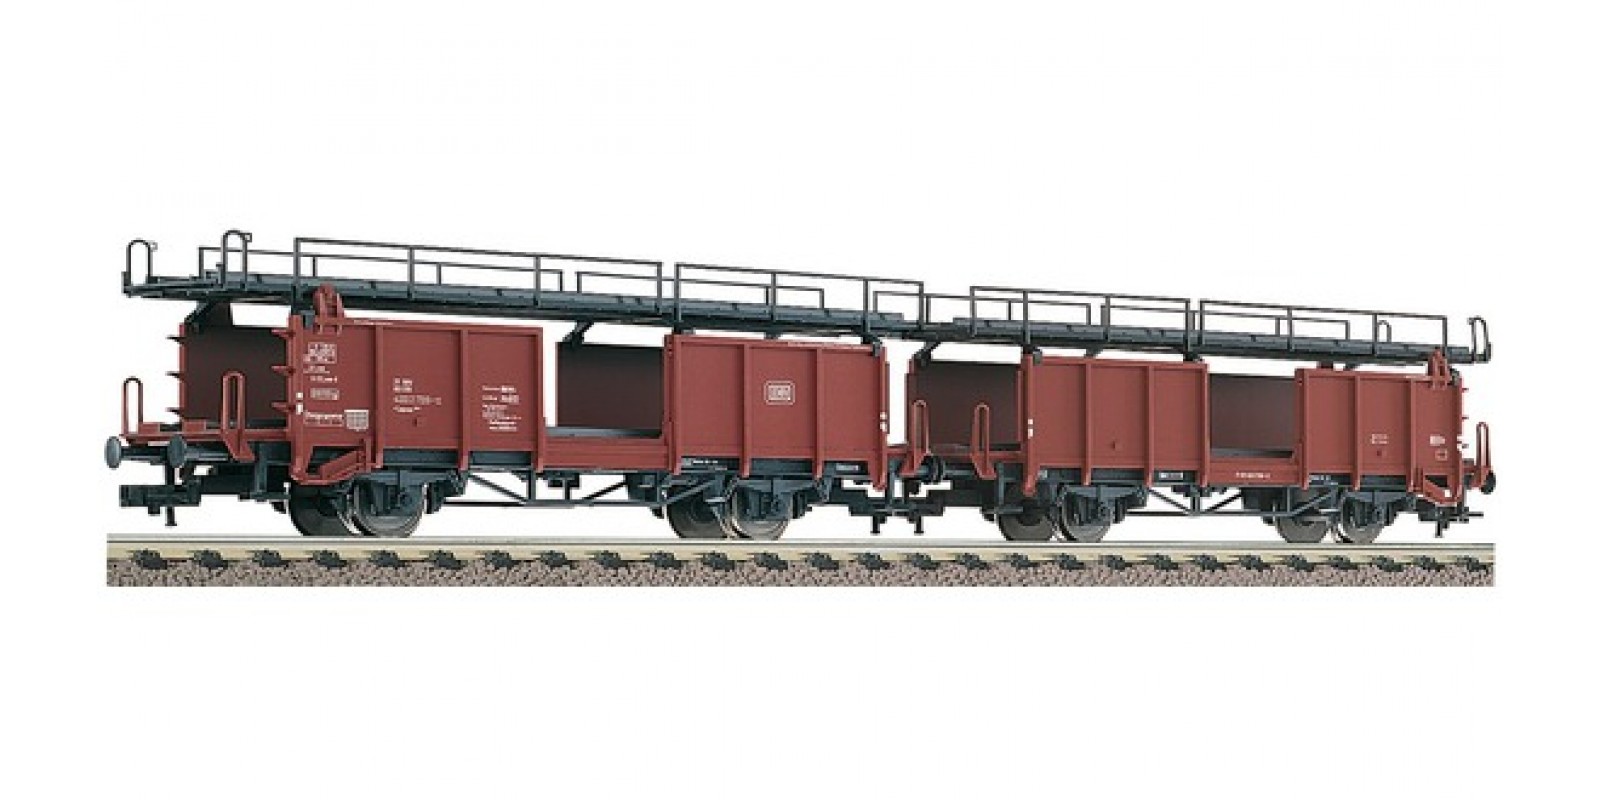 FL522401 - Two double decker car carryier wagons type Laaes 541, DB